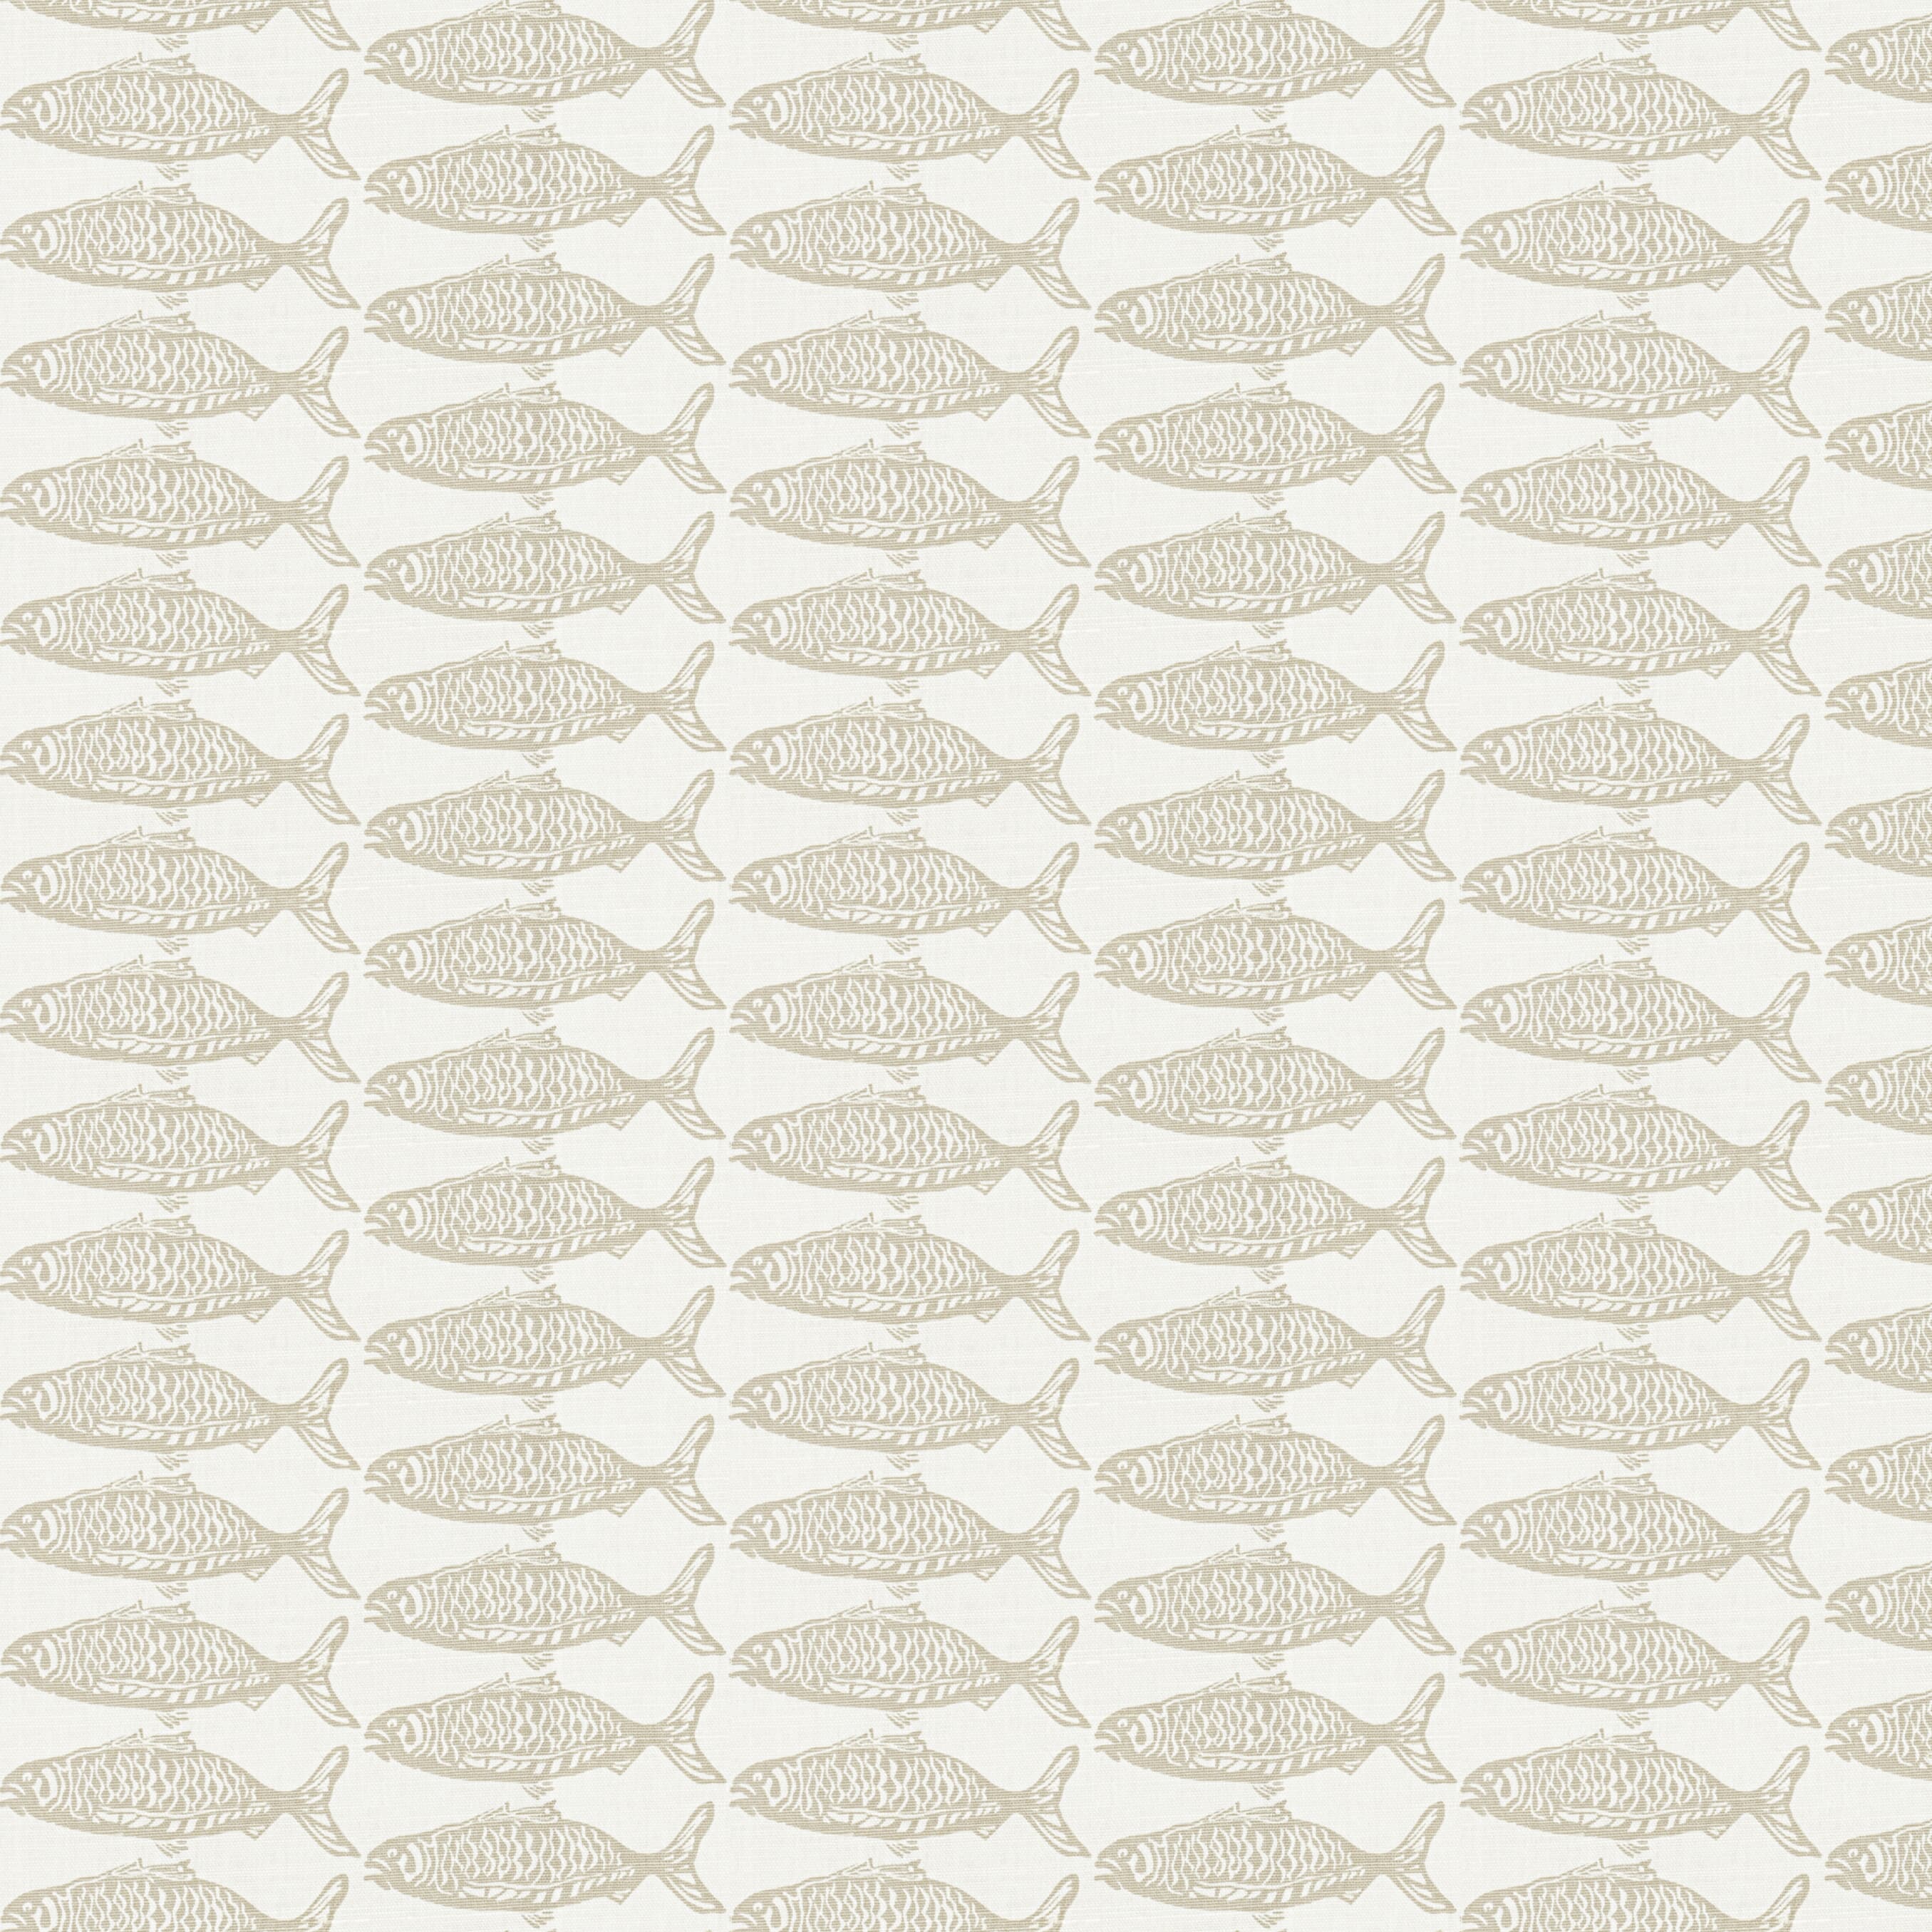 7826-1 School Of Fish Grey by Stout Fabric